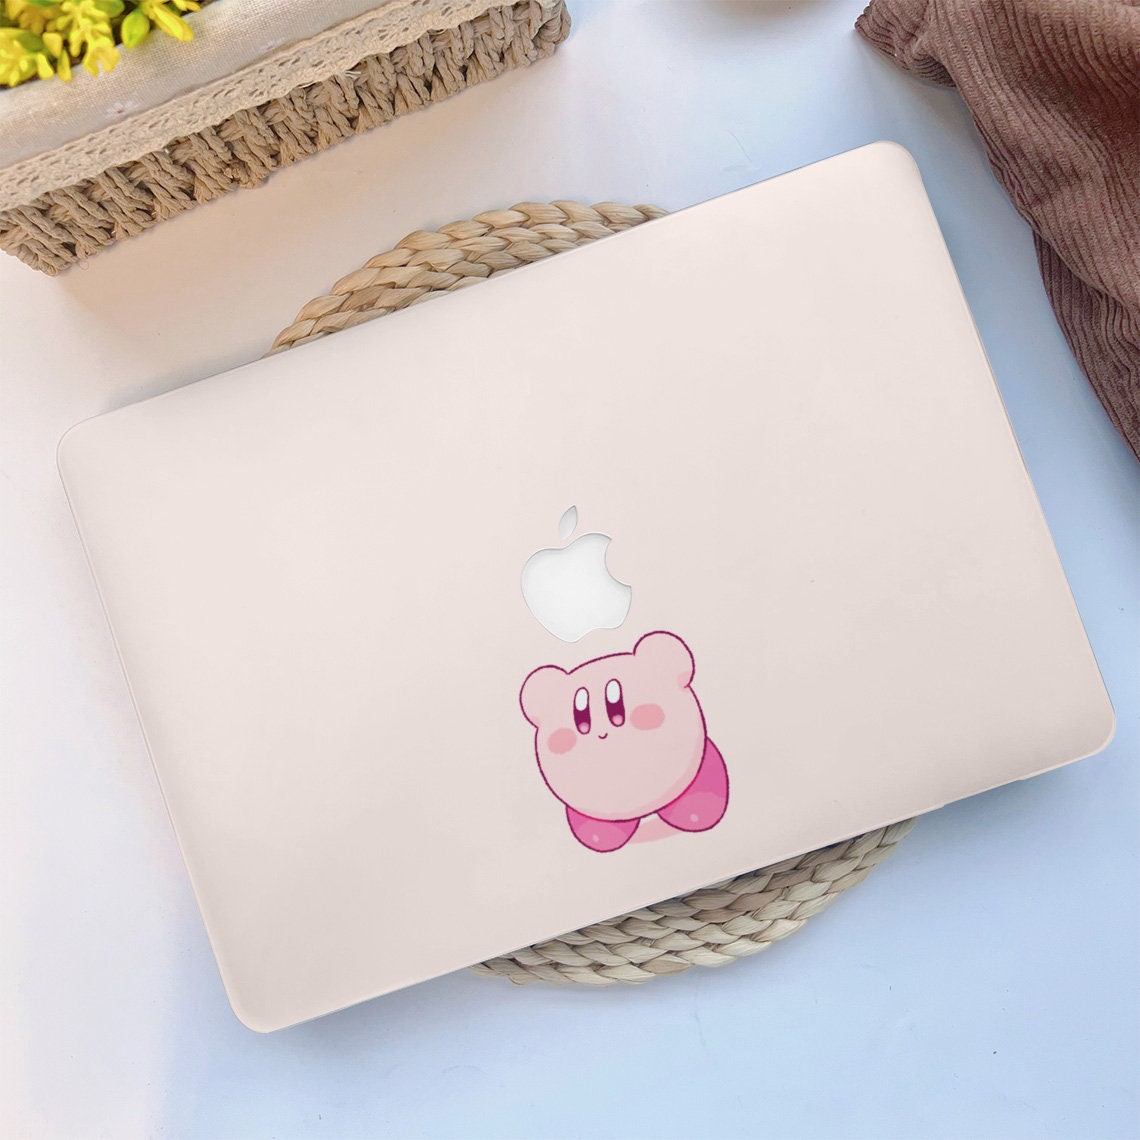 Pegasus Sailor Moon Macbook Pro Case Necklace Manga shirt earrings ring cell phone case for Macbook Air 13 11 Pro 13 15 Retina 2016 2017 Macbook 12 inch Cover Anime gift for for girls women 